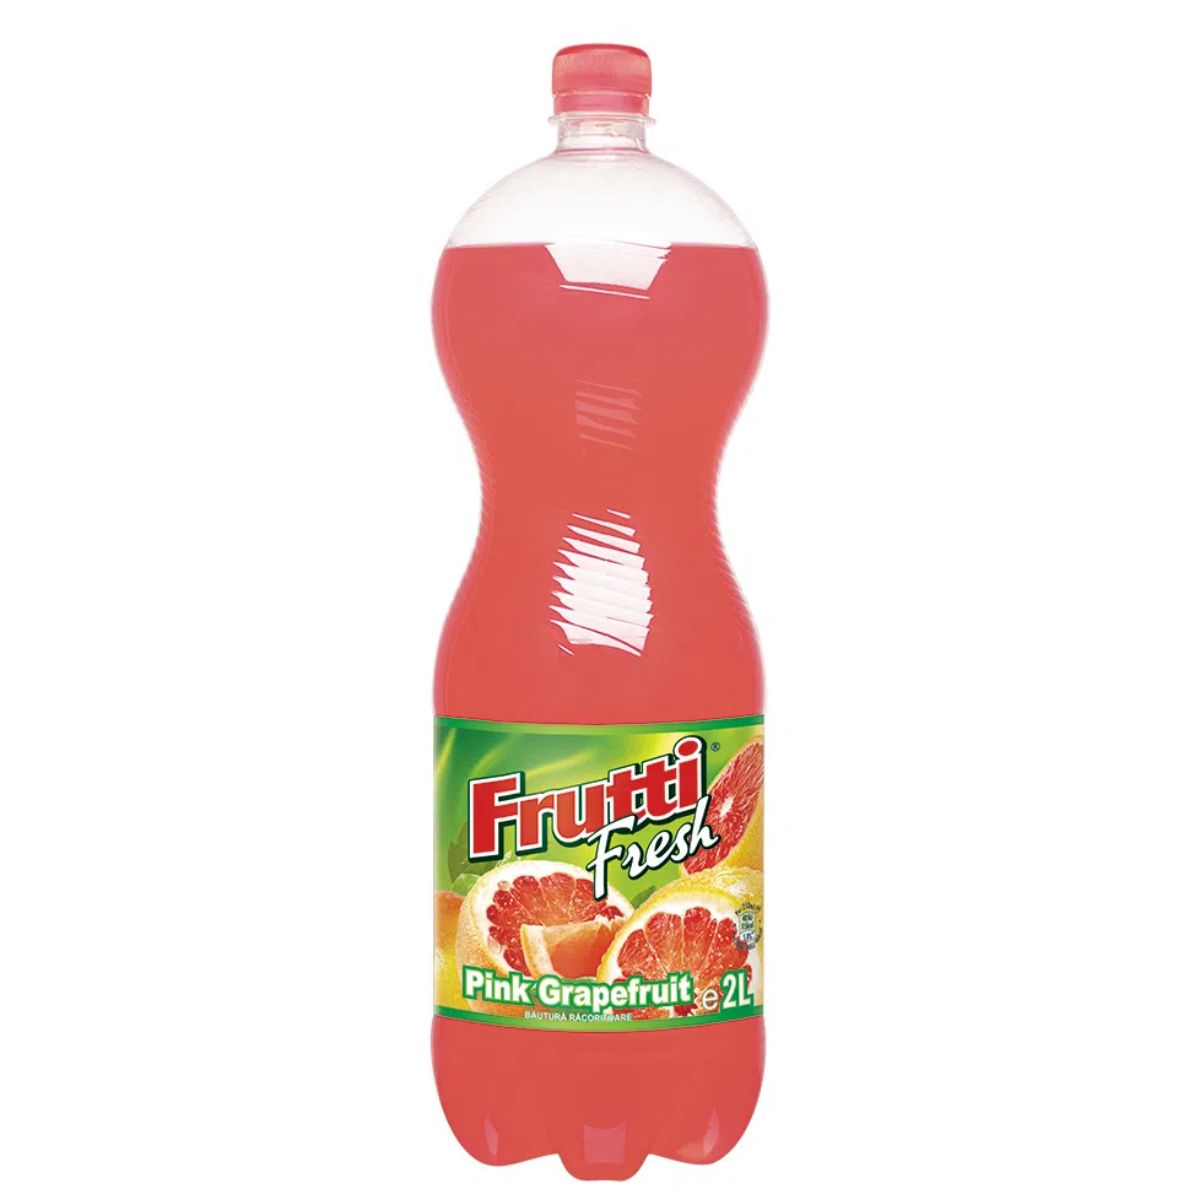 A bottle of Frutti Fresh - Grape Fruit Flavour Drink - 2L with a strawberry on it.